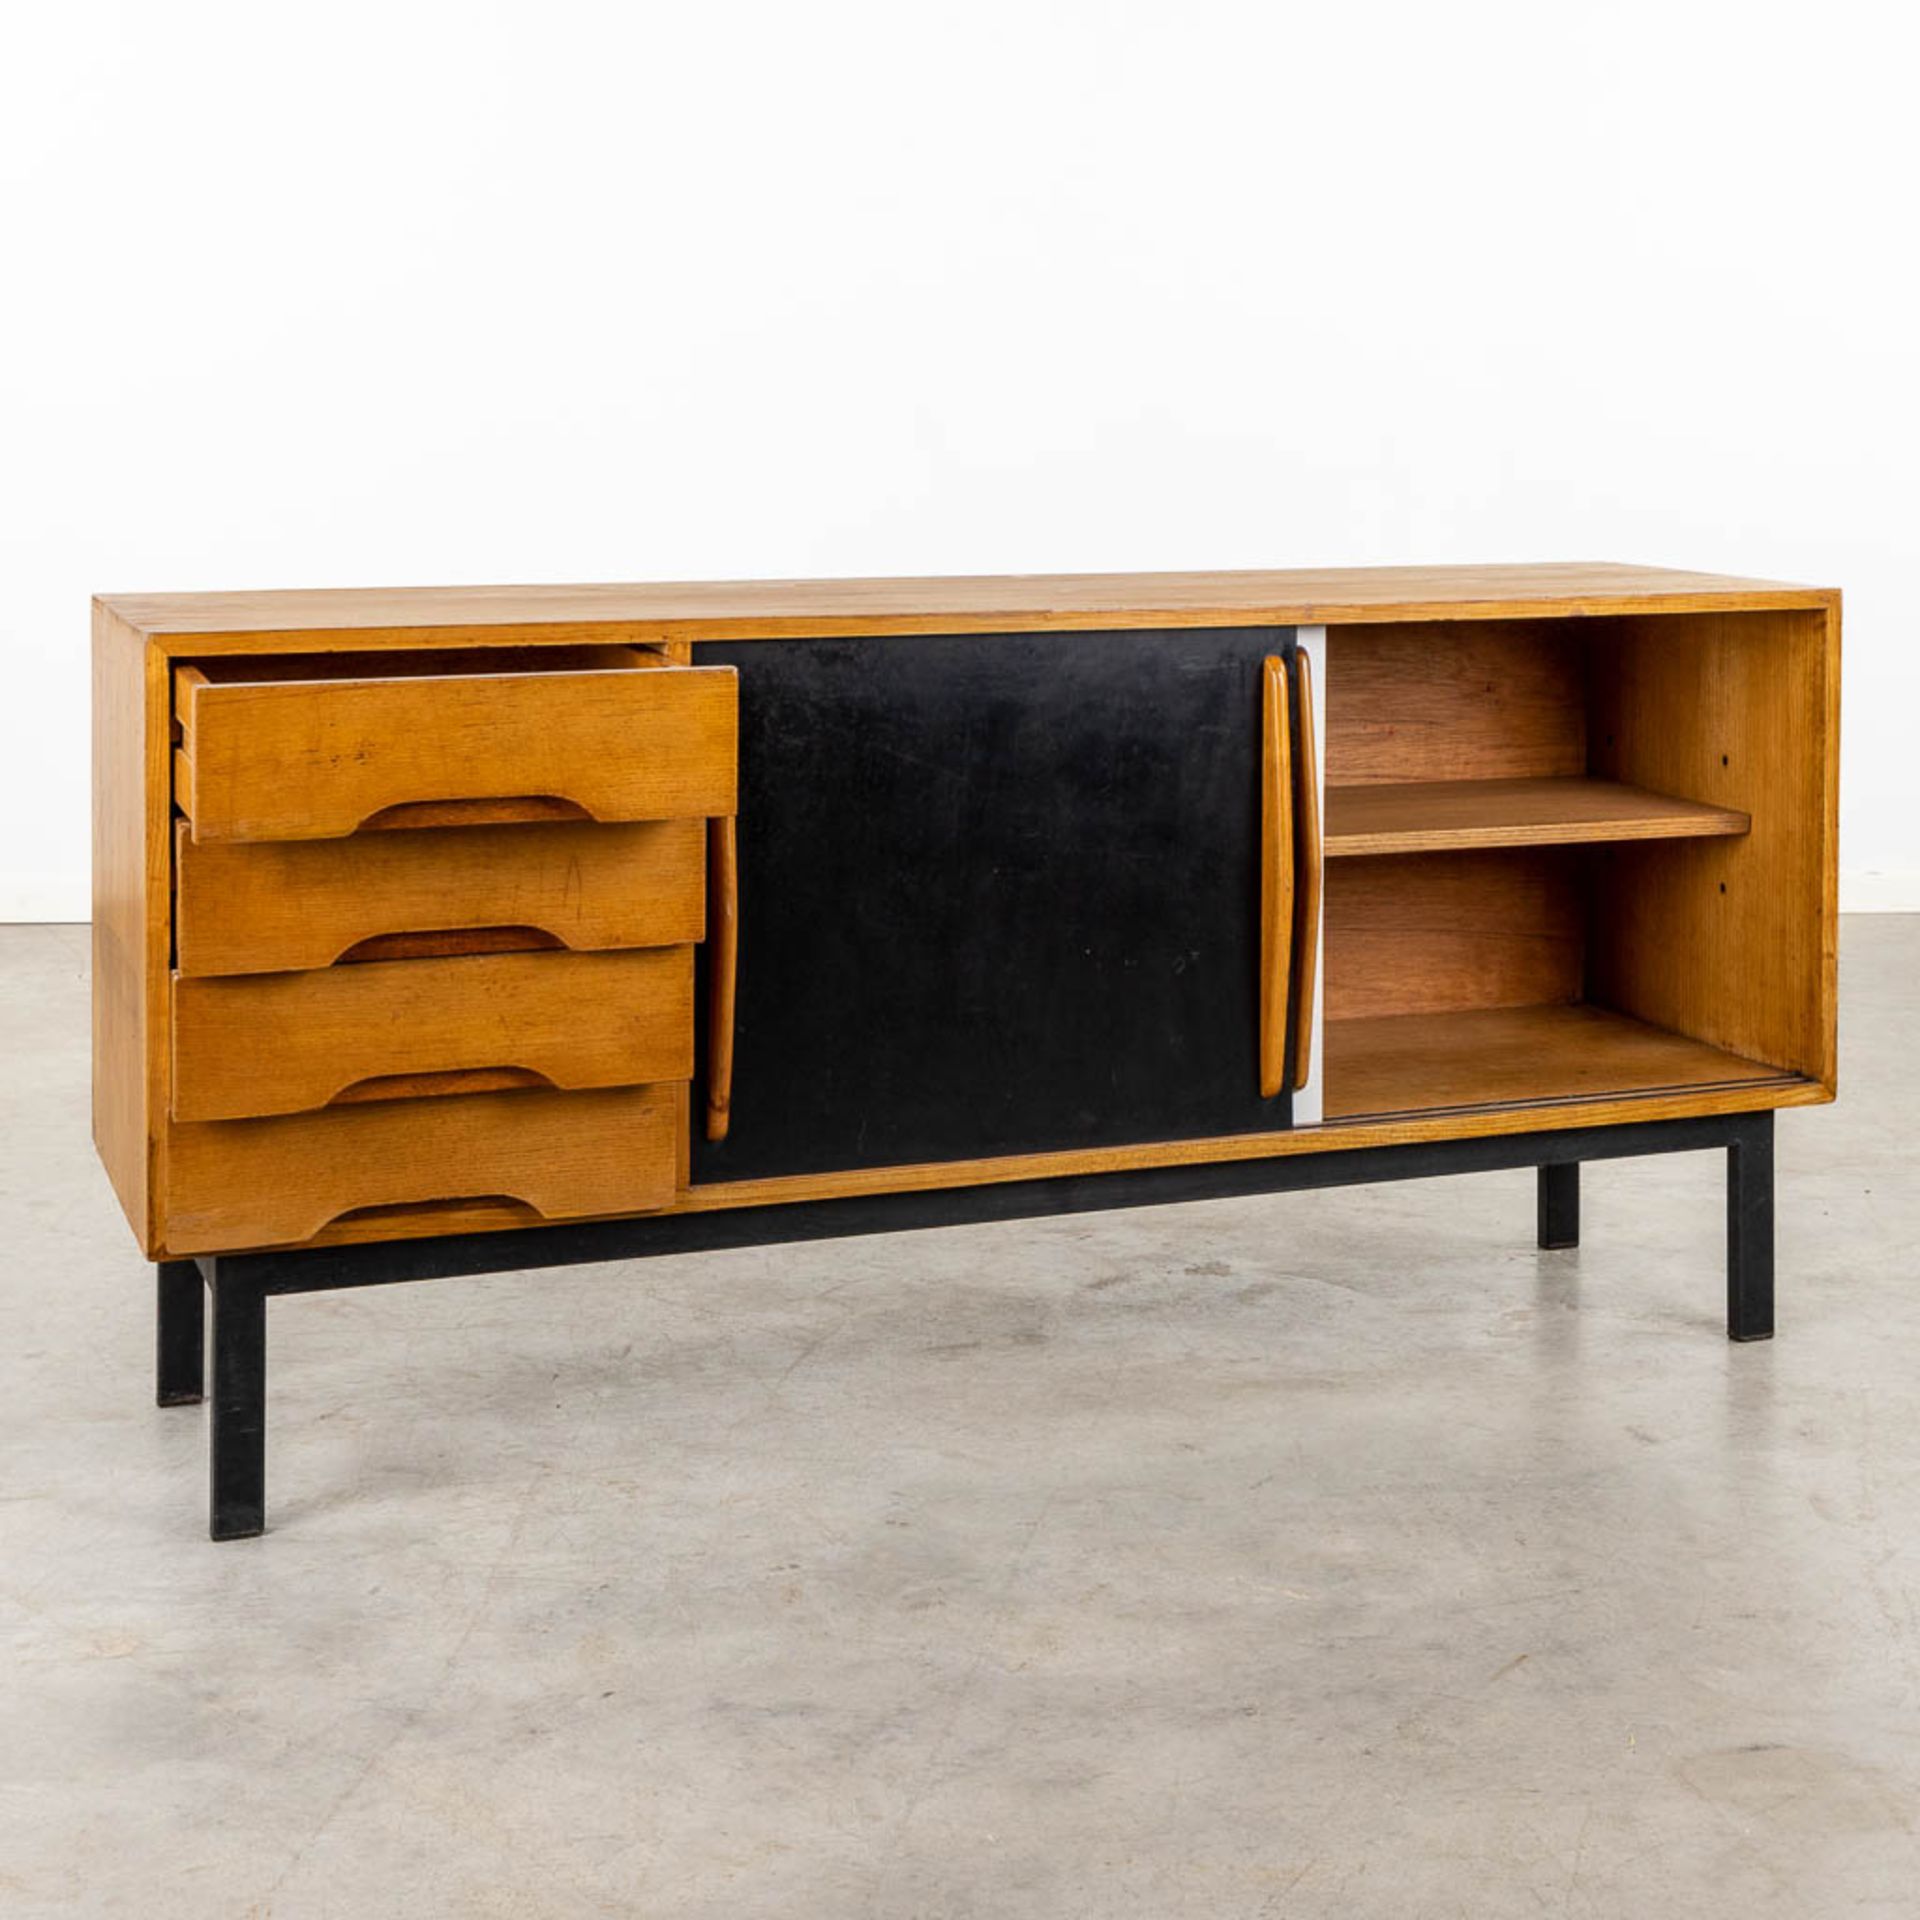 Charlotte PERRIAND (1903-1999) 'Cansado' a sideboard (D:47 x W:158 x H:73 cm) - Image 4 of 16